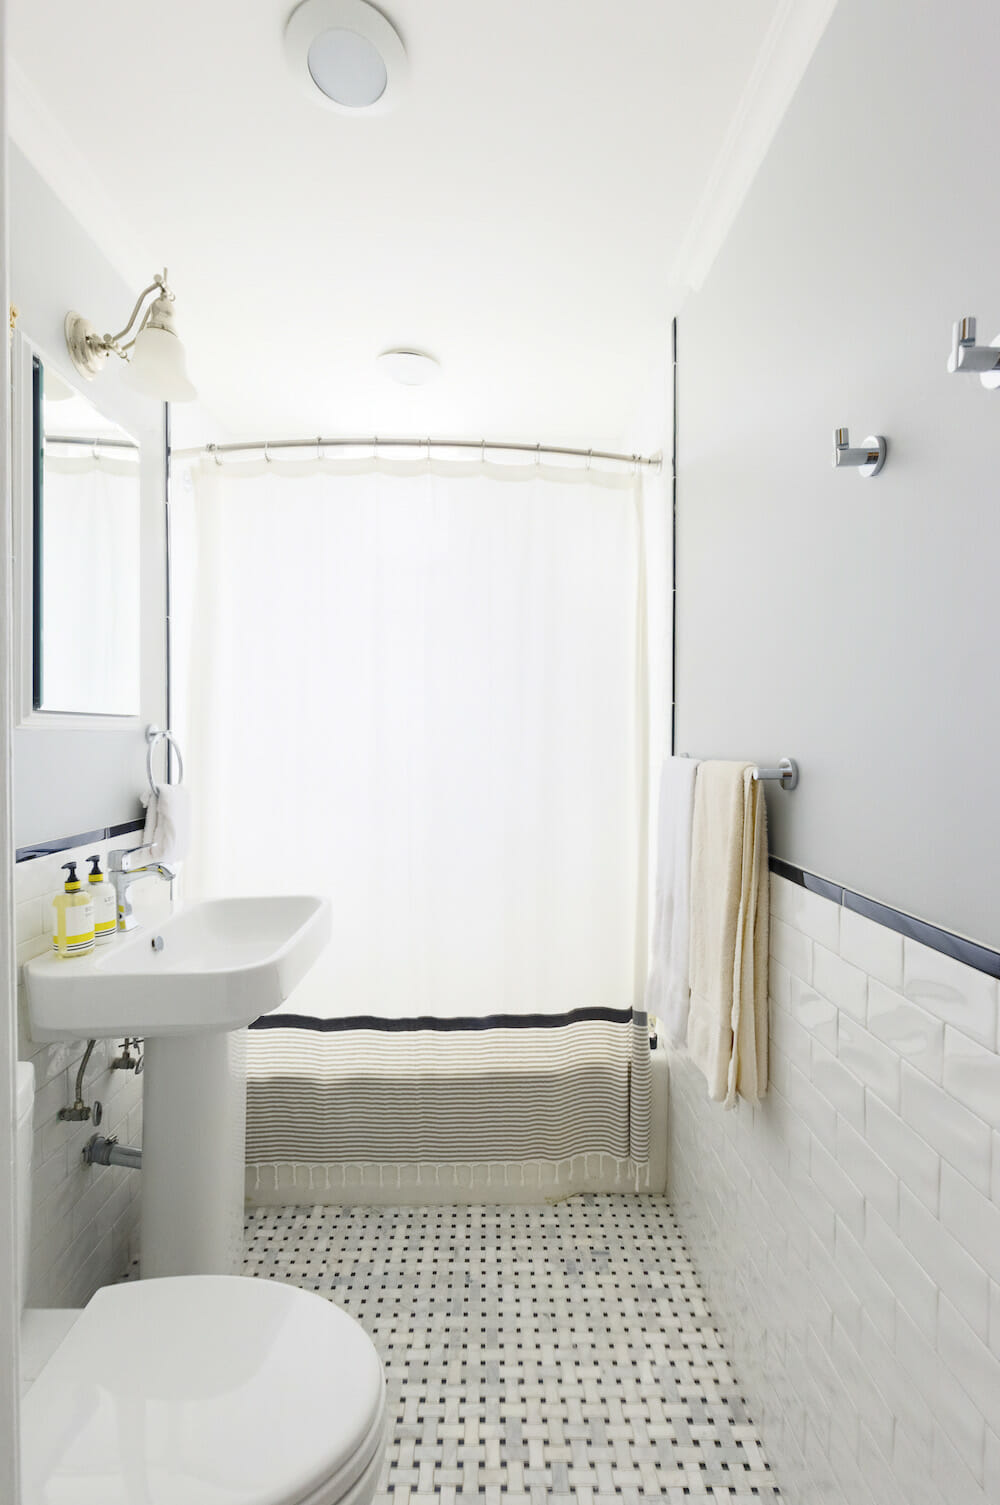 Bathroom Tiles And How Much They Cost, How Much To Tile A Bathroom